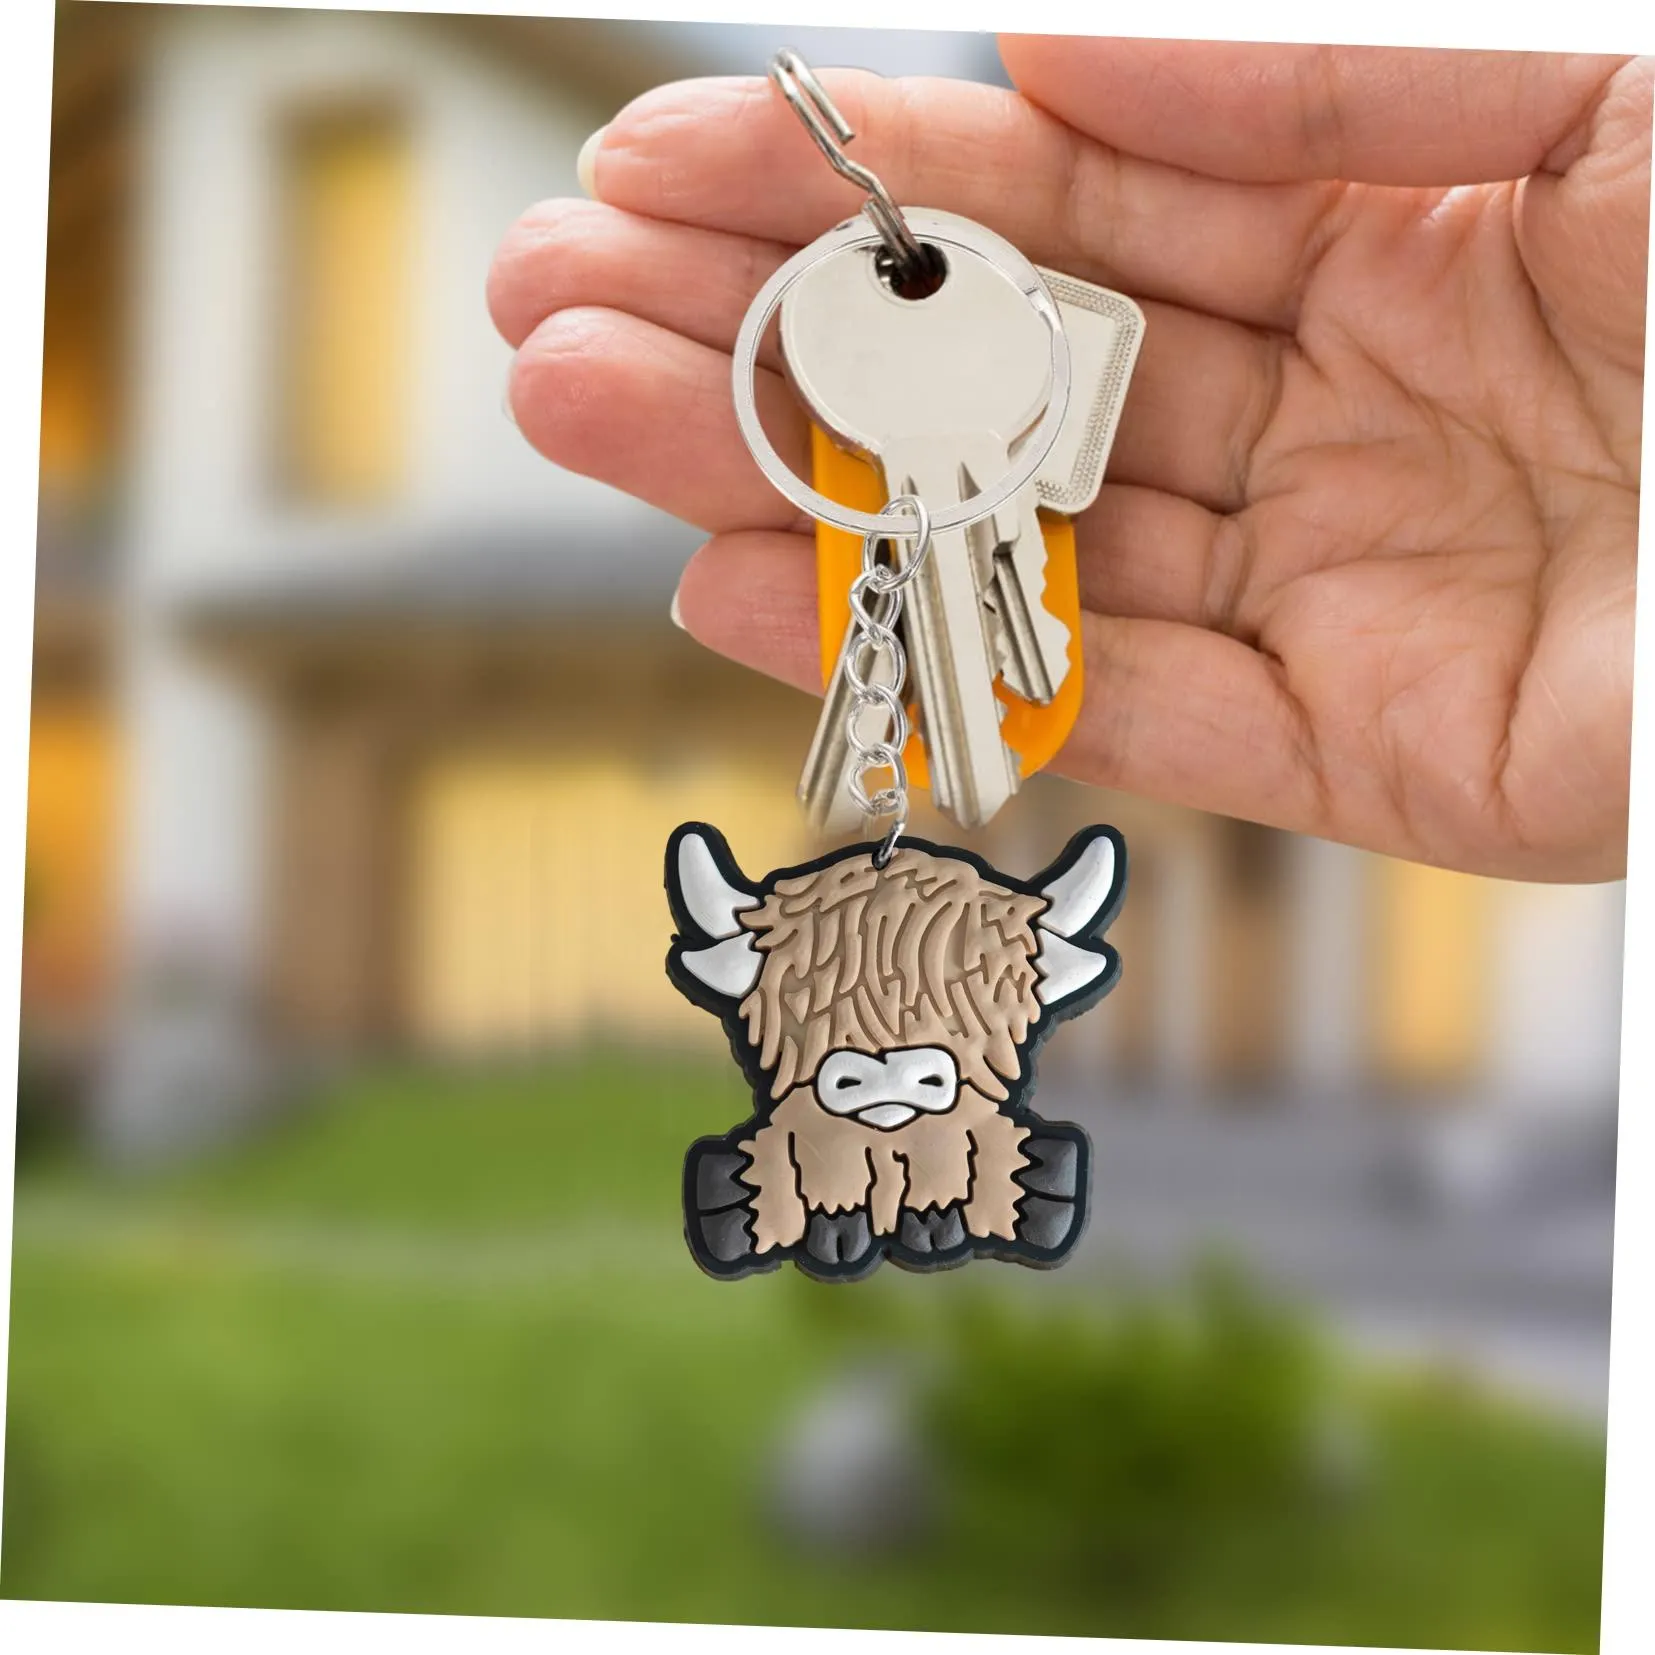 sheep keychain keychains for childrens party favors key chain gift keyring suitable schoolbag men tags goodie bag stuffer christmas gifts ring boys